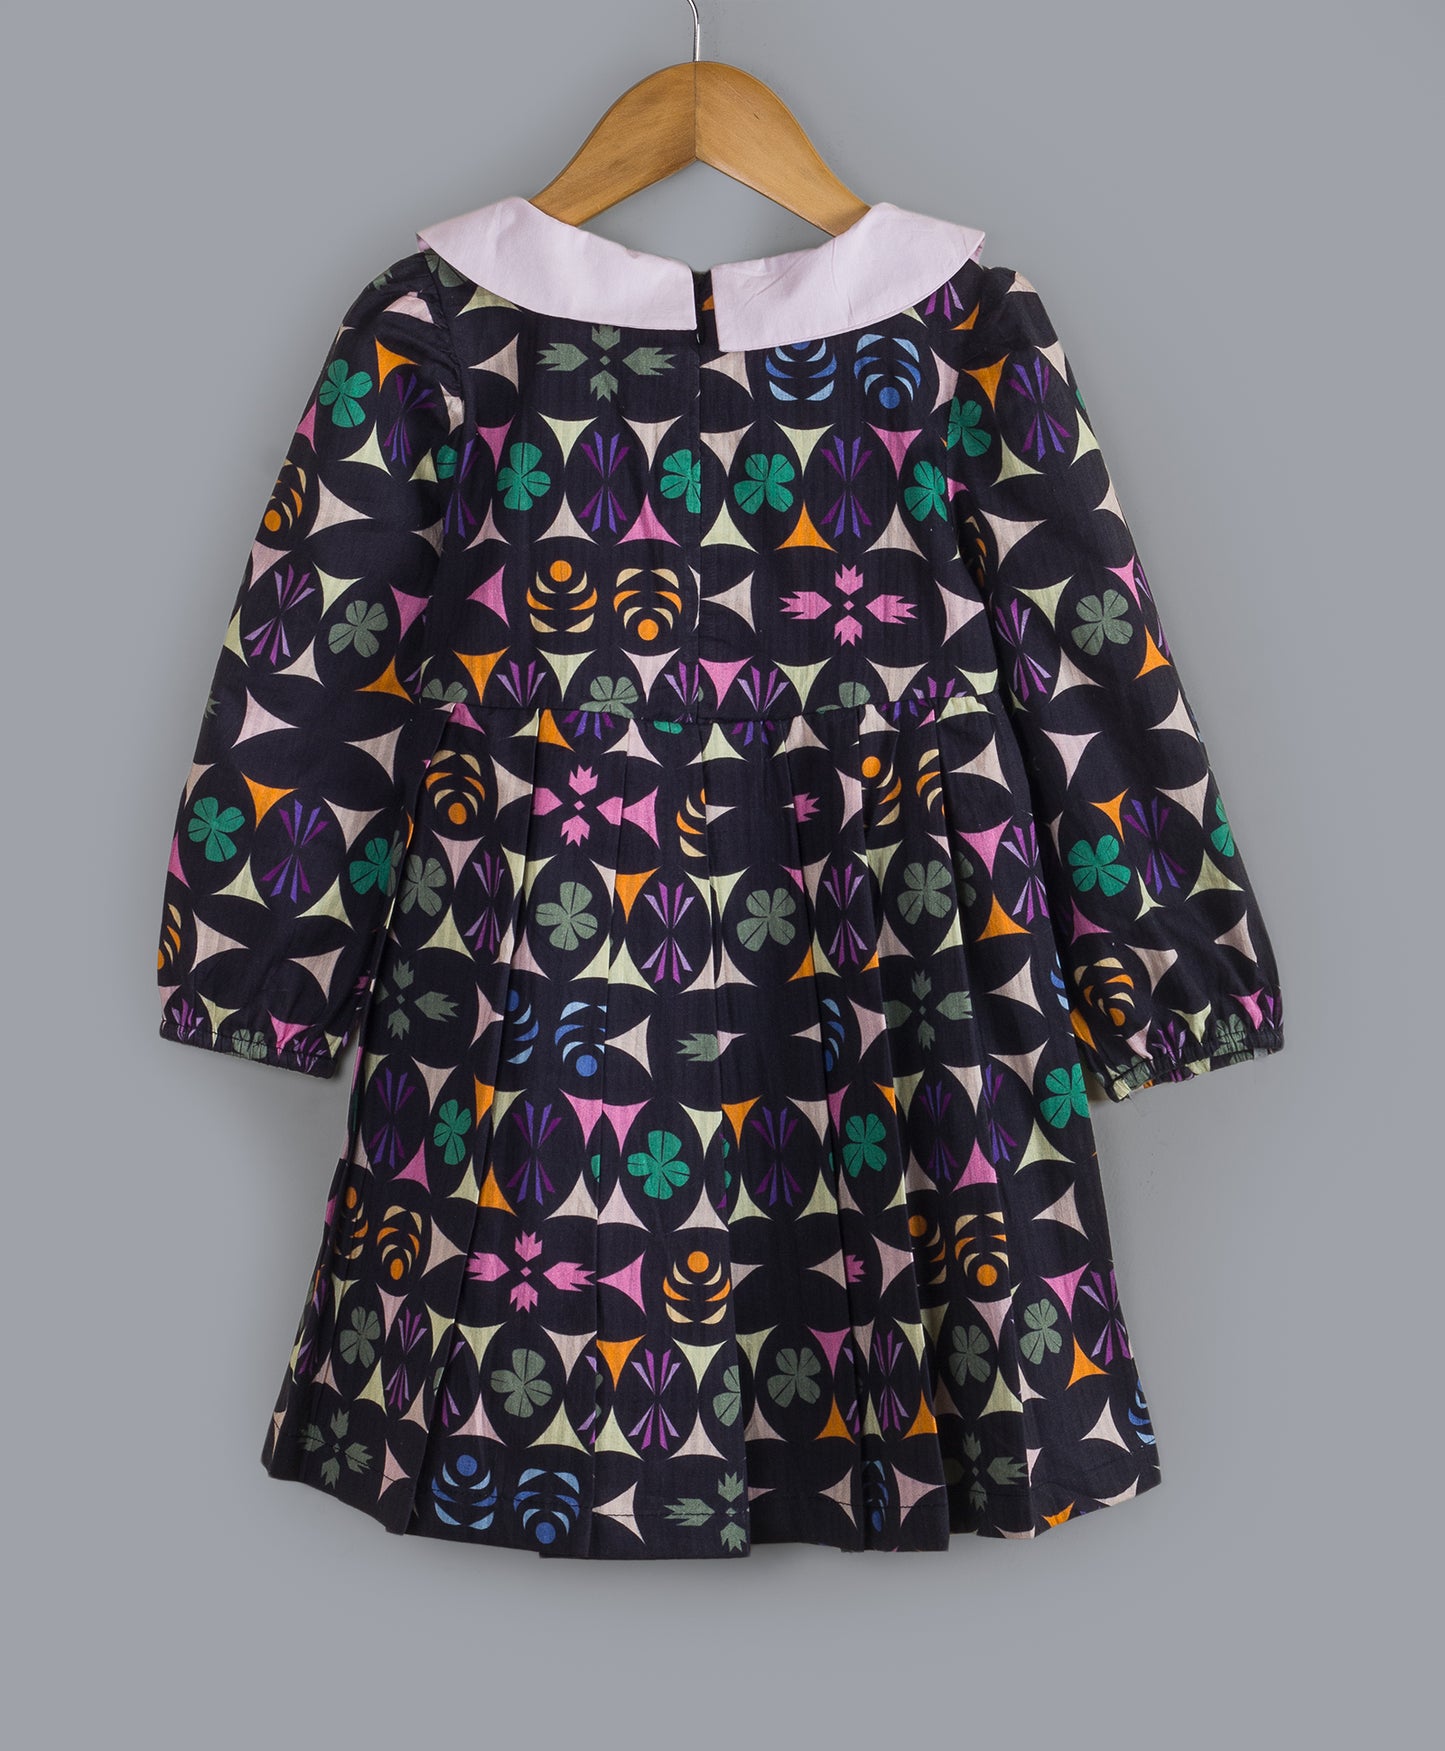 Kaleidoscope print full sleeves dress with contrast collars